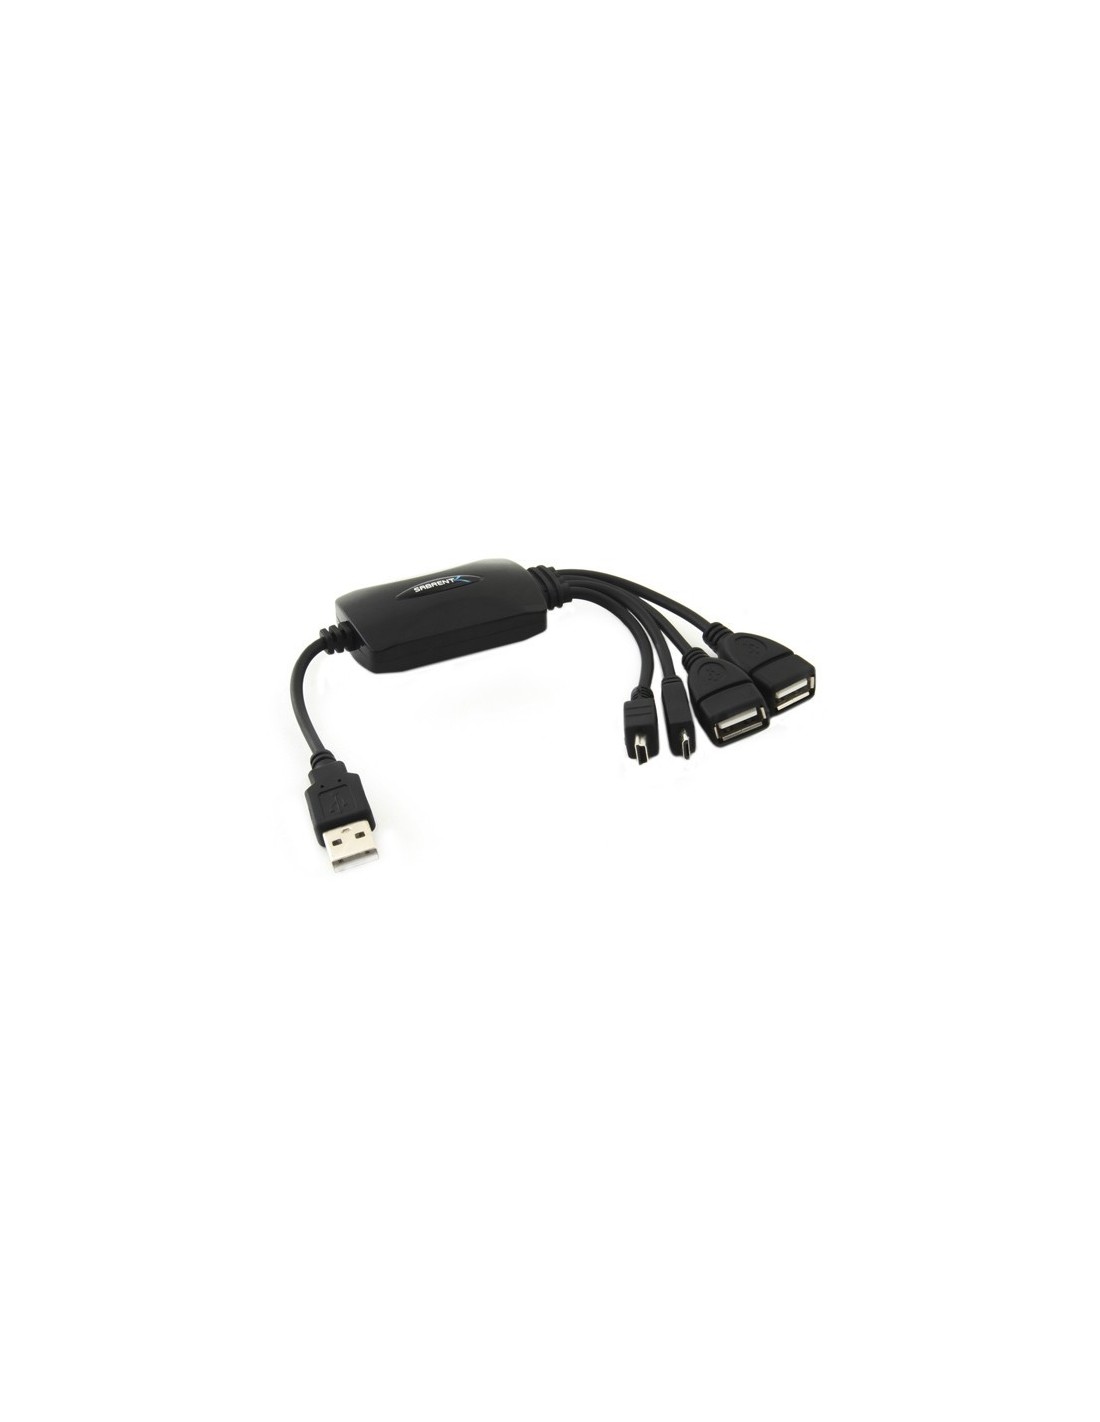 instructions for networking usb 2.0 print server